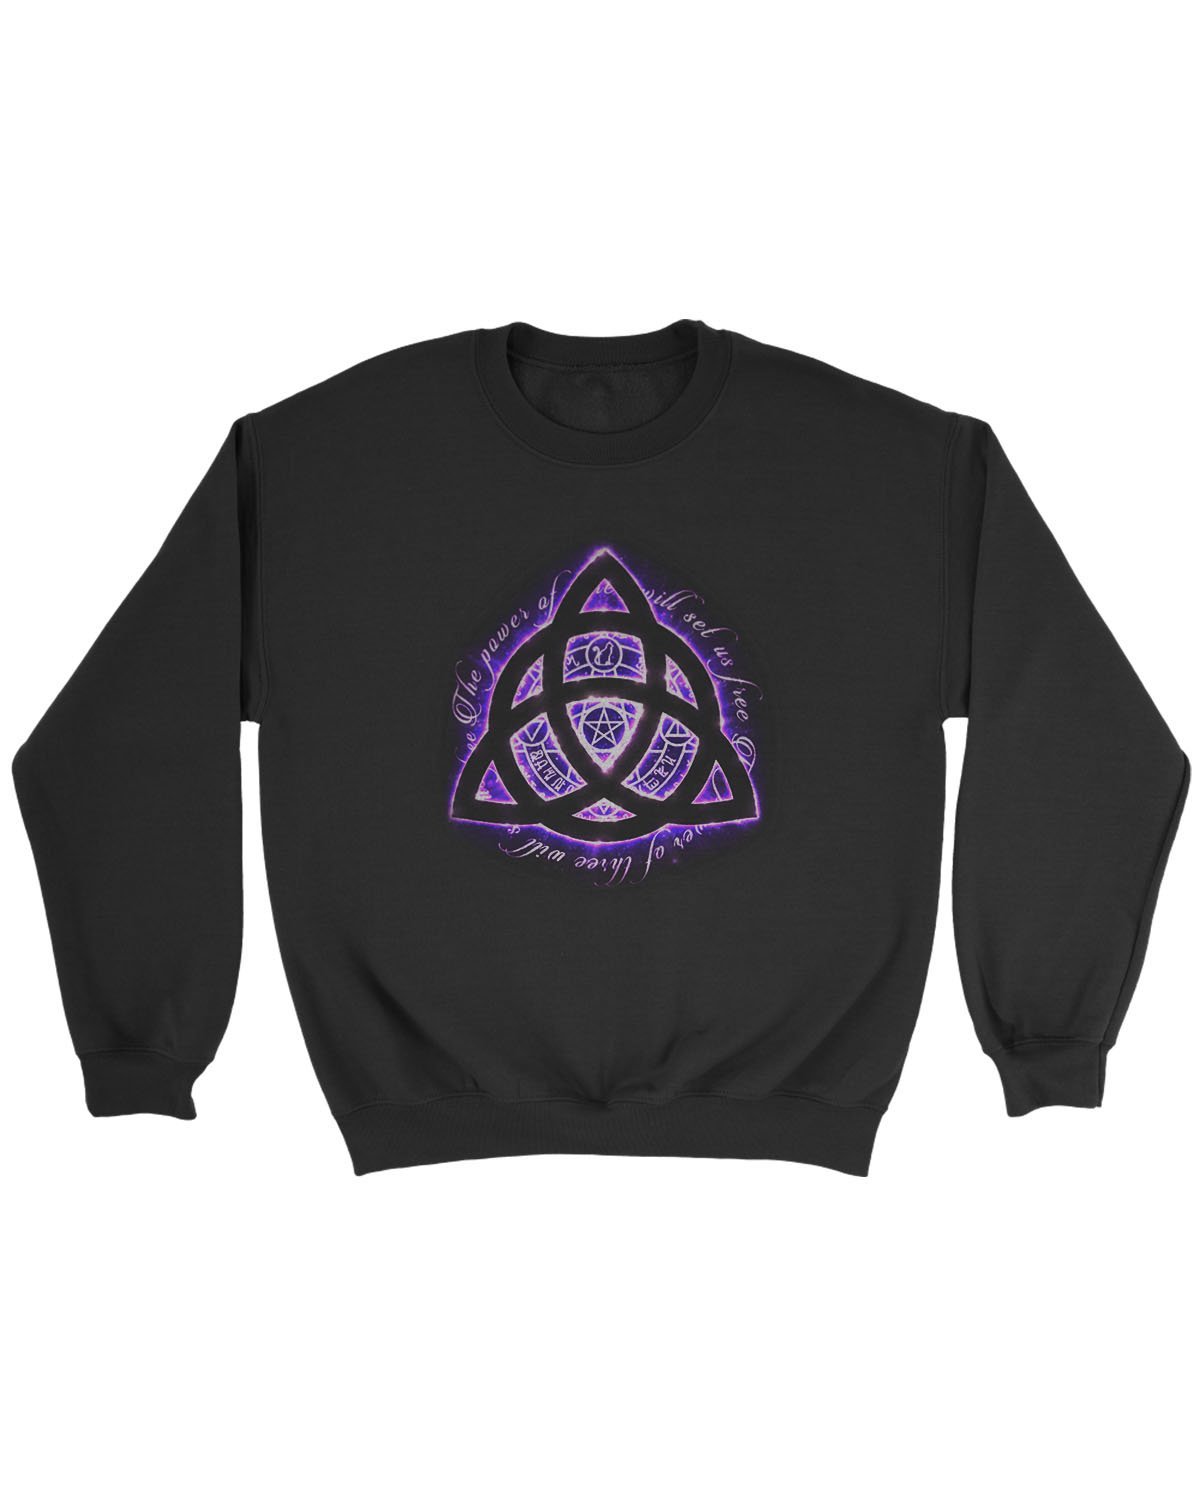 Charmed Witches Sweatshirt